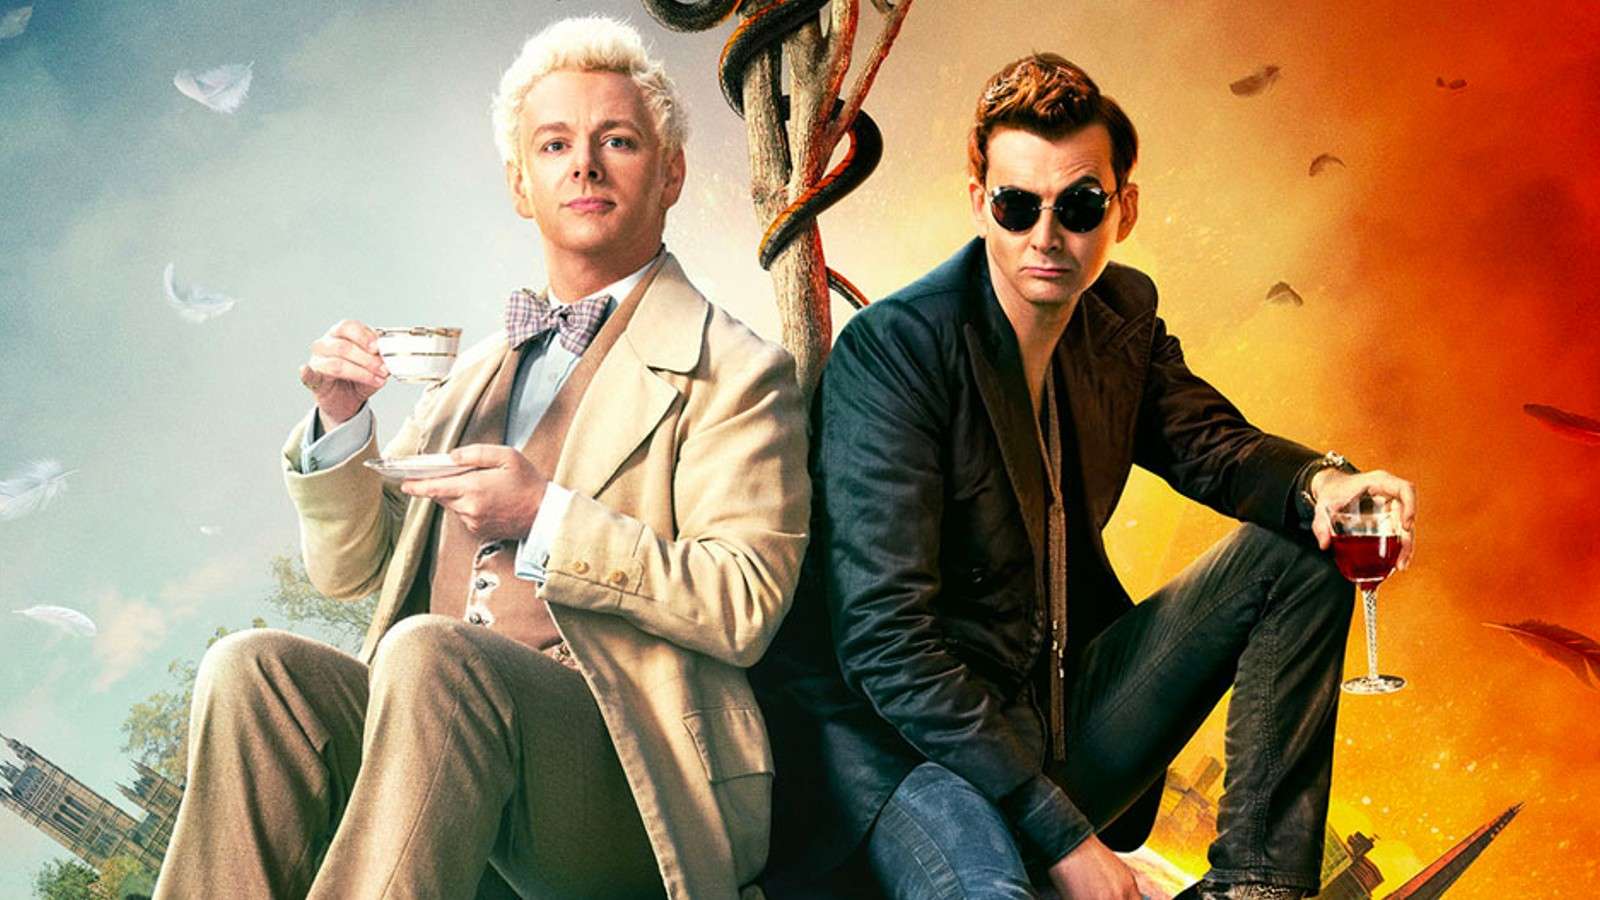 Michael Sheen and David Tennant on the poster for Good Omens